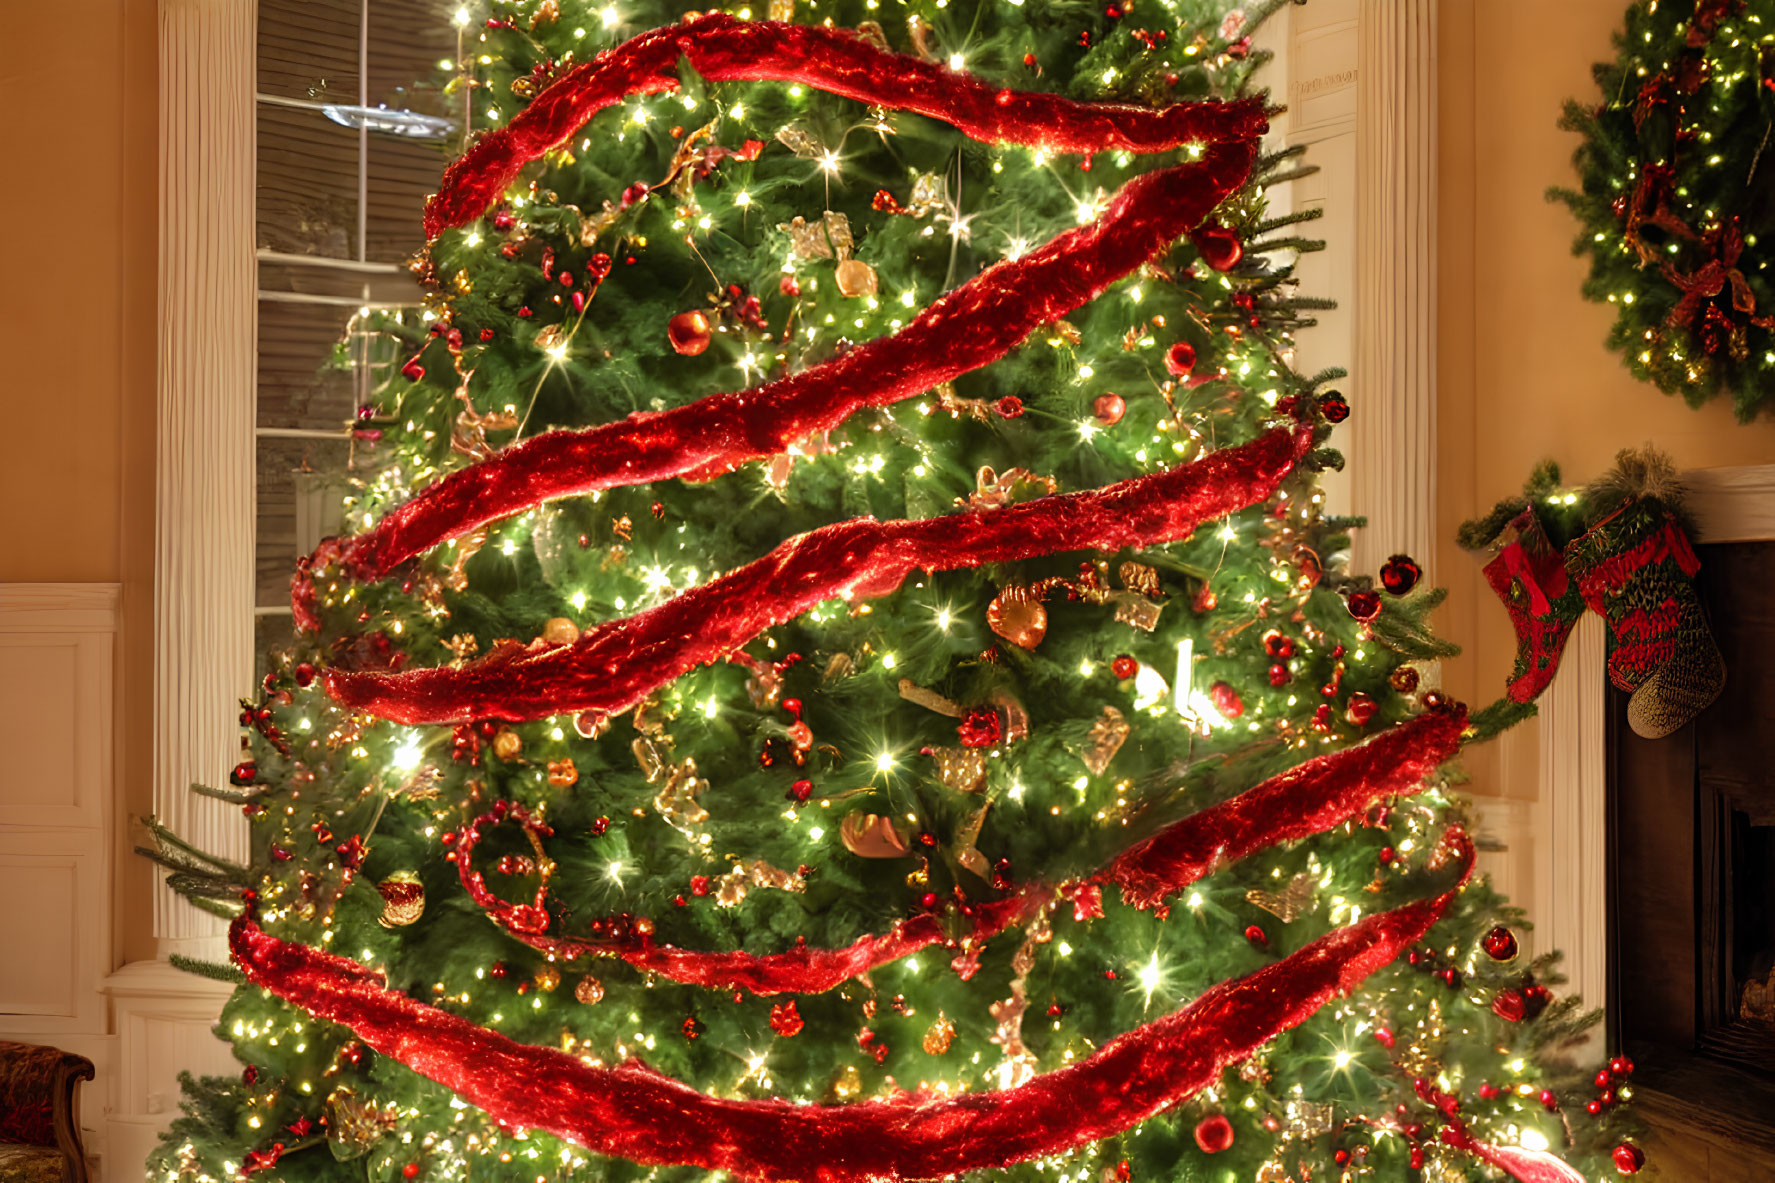 Festive Christmas tree with red garlands, lights, ornaments, and stockings